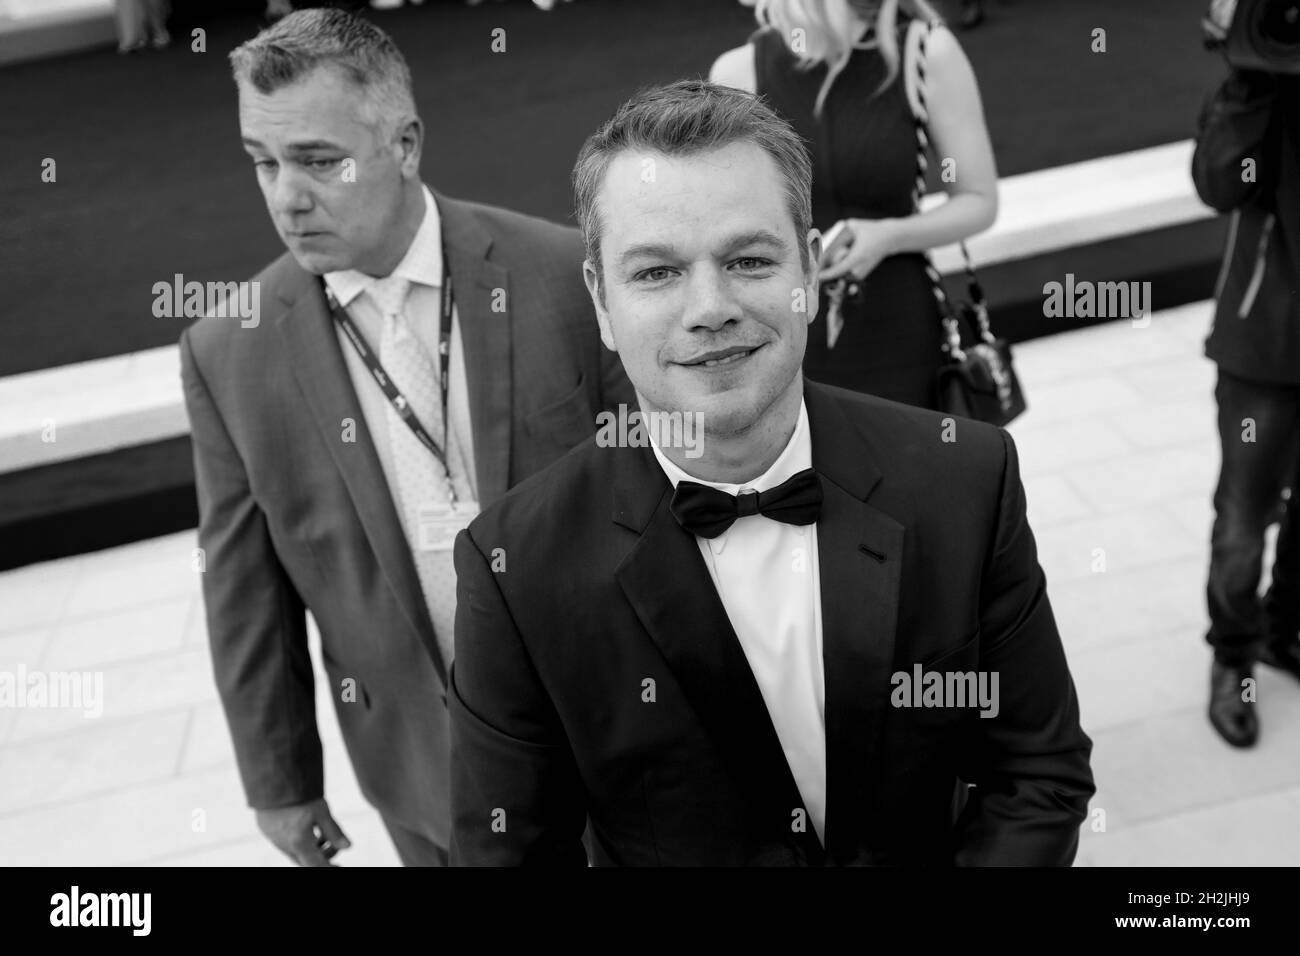 Actor Matt Damon Arrive at the Red carpet of the movie 'Downsizing' at the 74th Venice Film Festival in Venice, Italy August 30, 2017. (MvS) Stock Photo